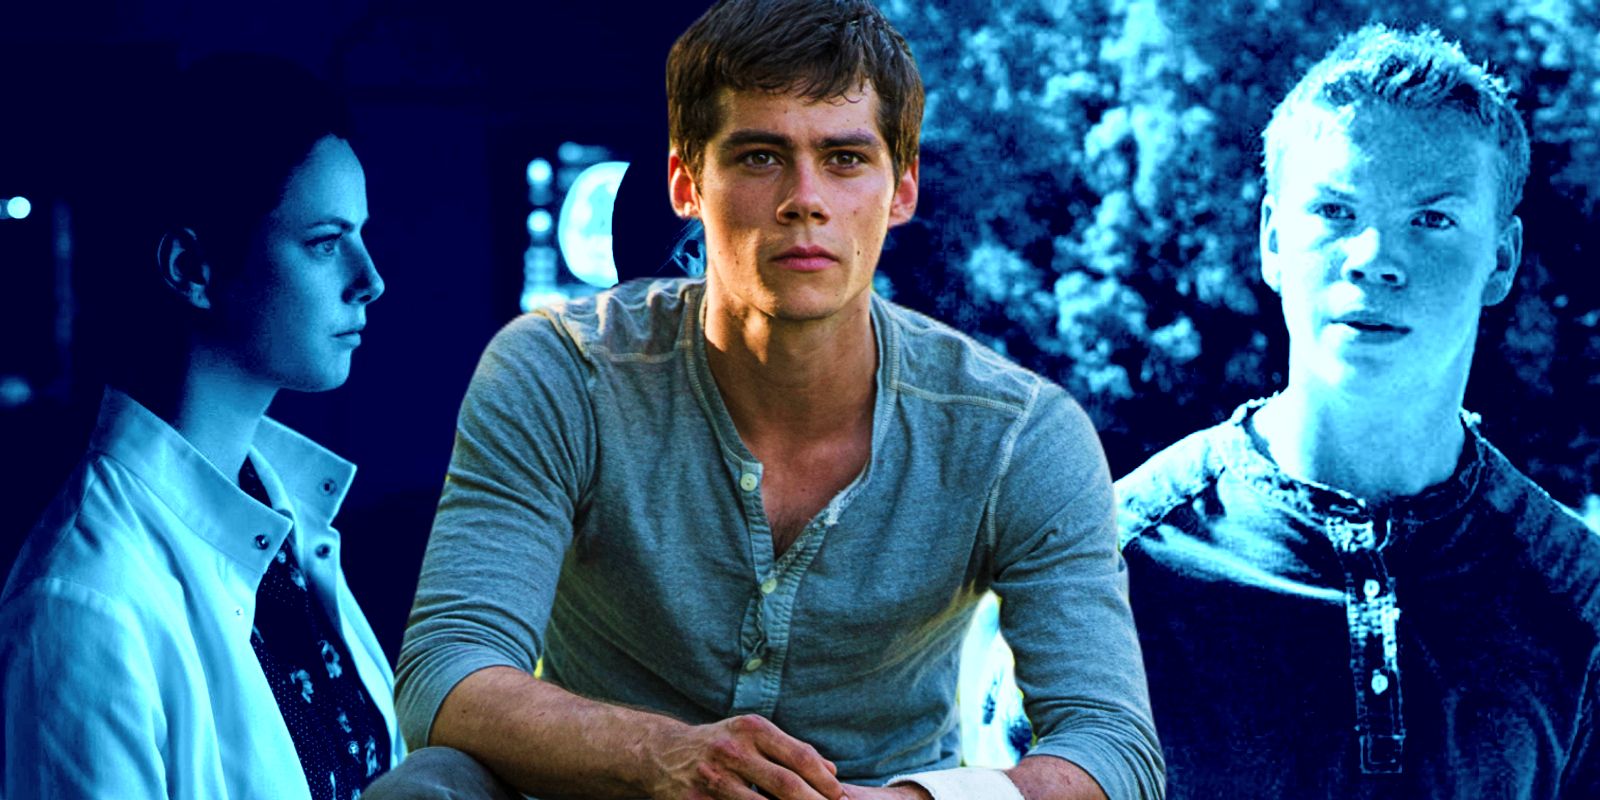 Maze Runner 4 Can Still Happen, But The Books Make Future Movies Impossible